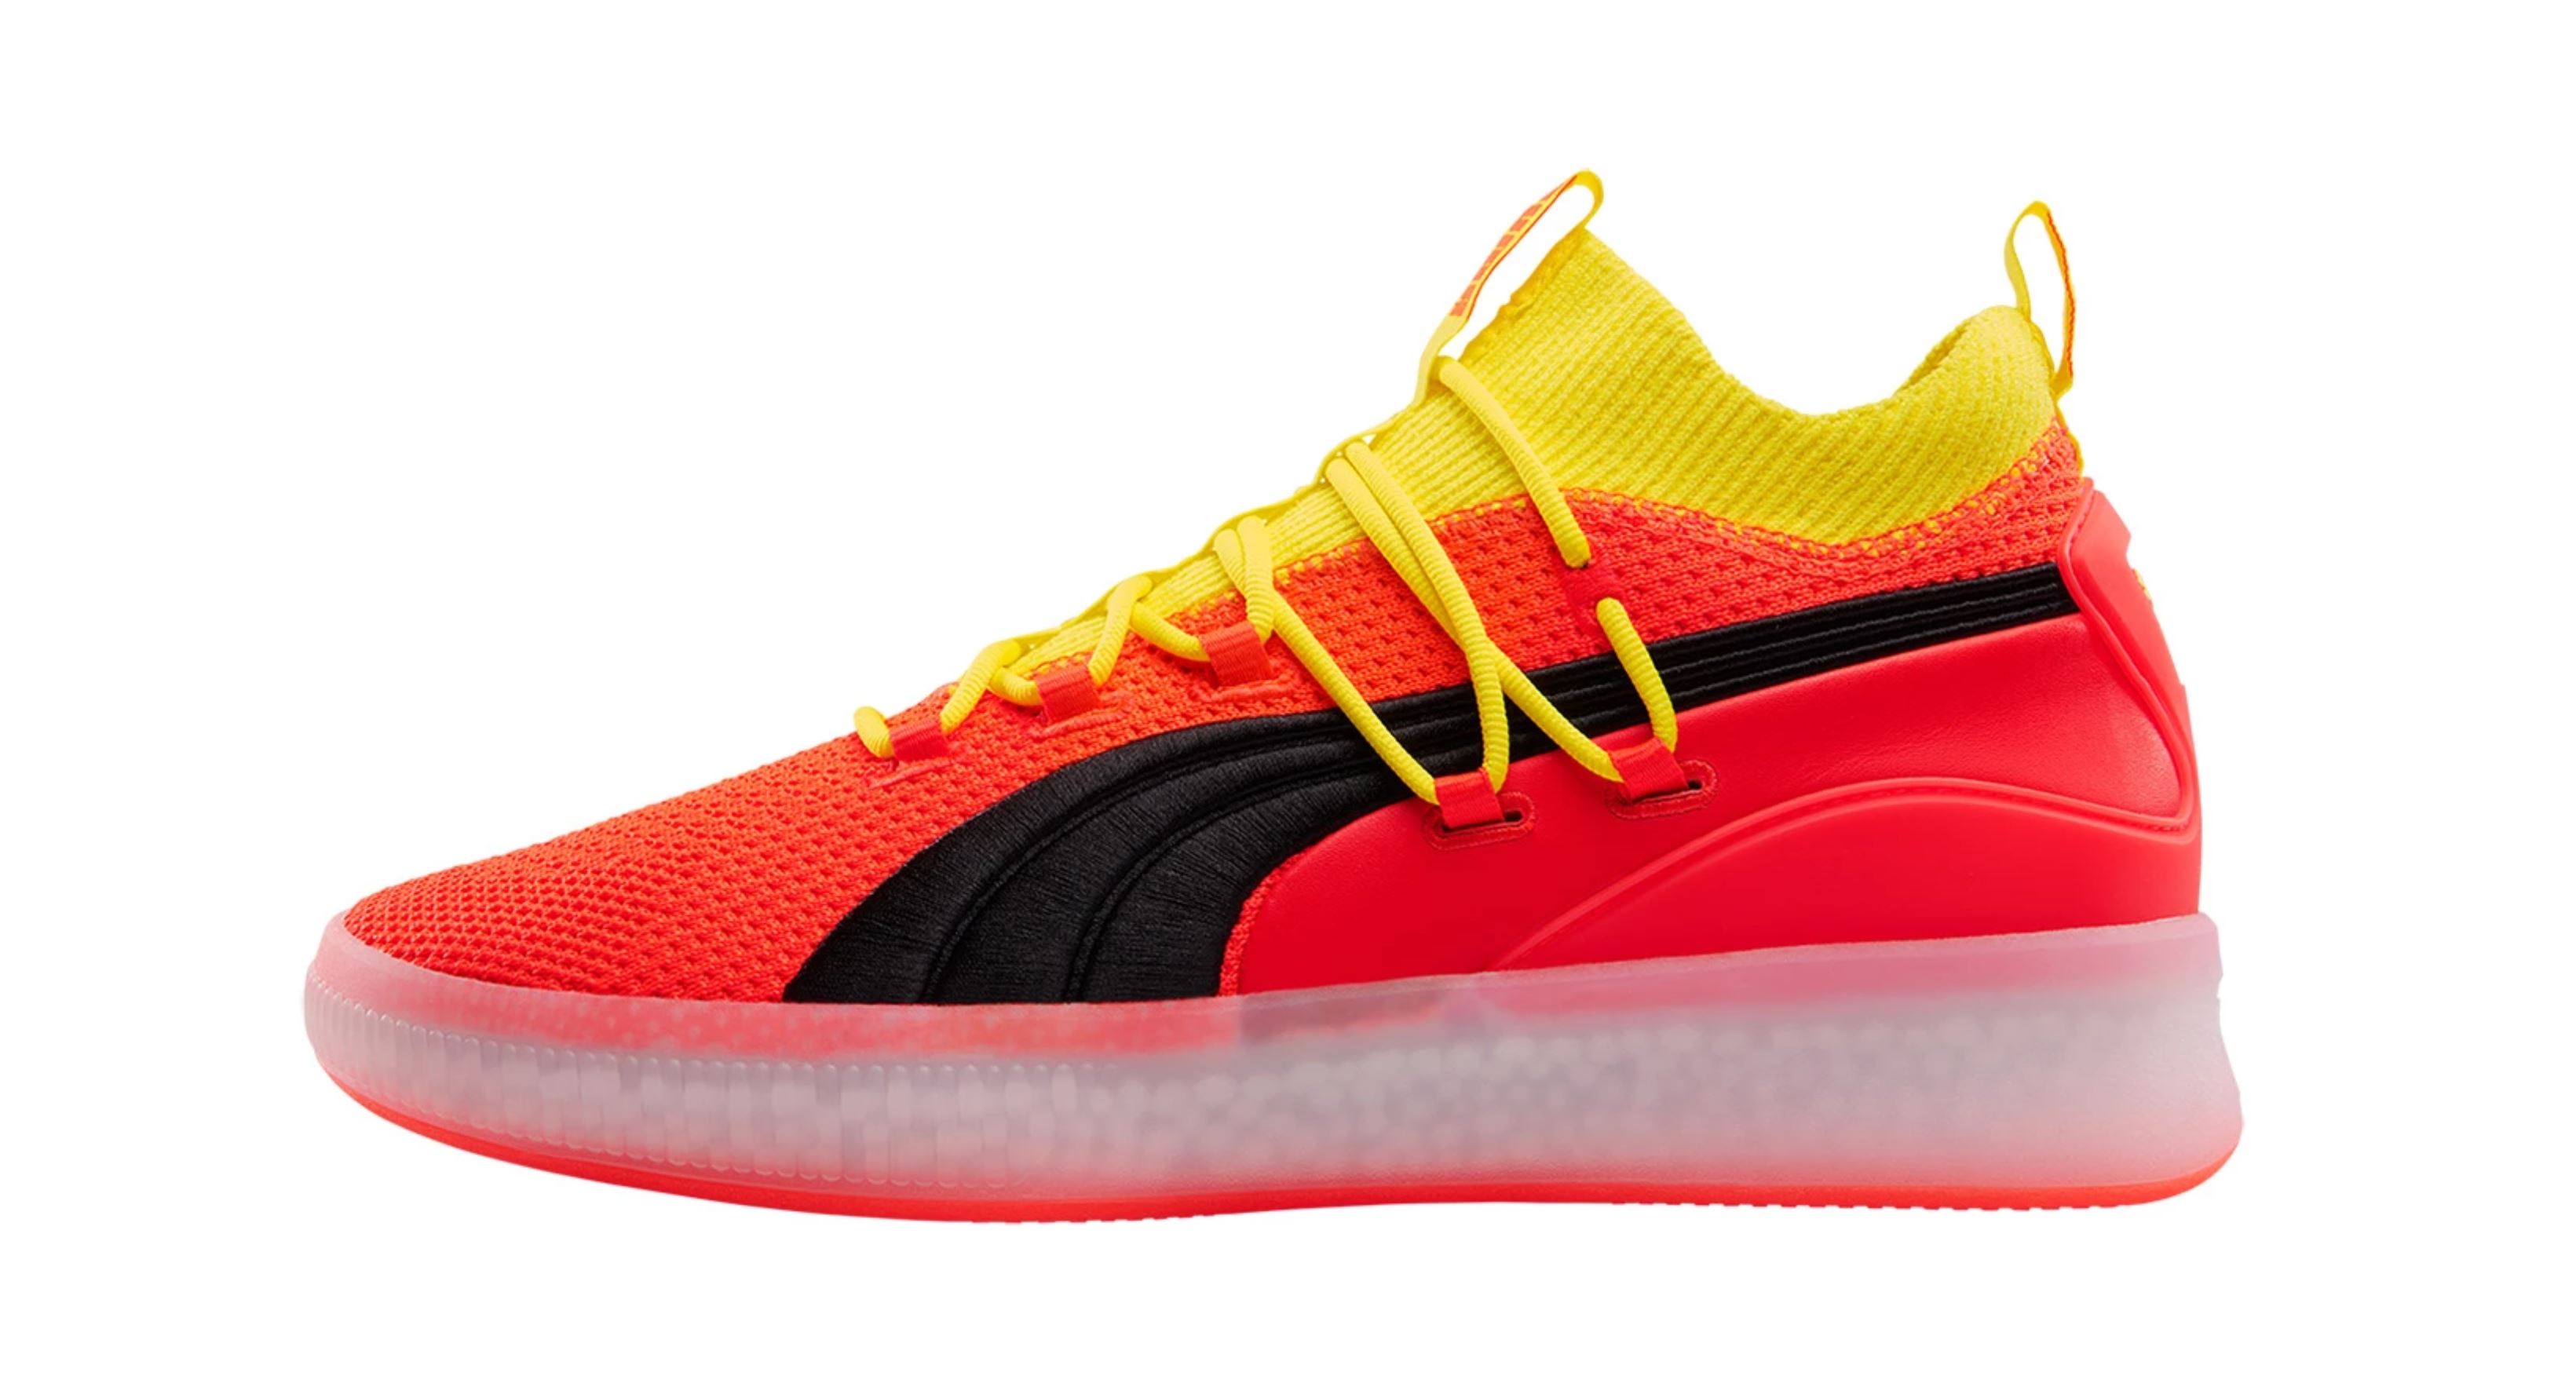 Puma Re-enters Basketball Market with 